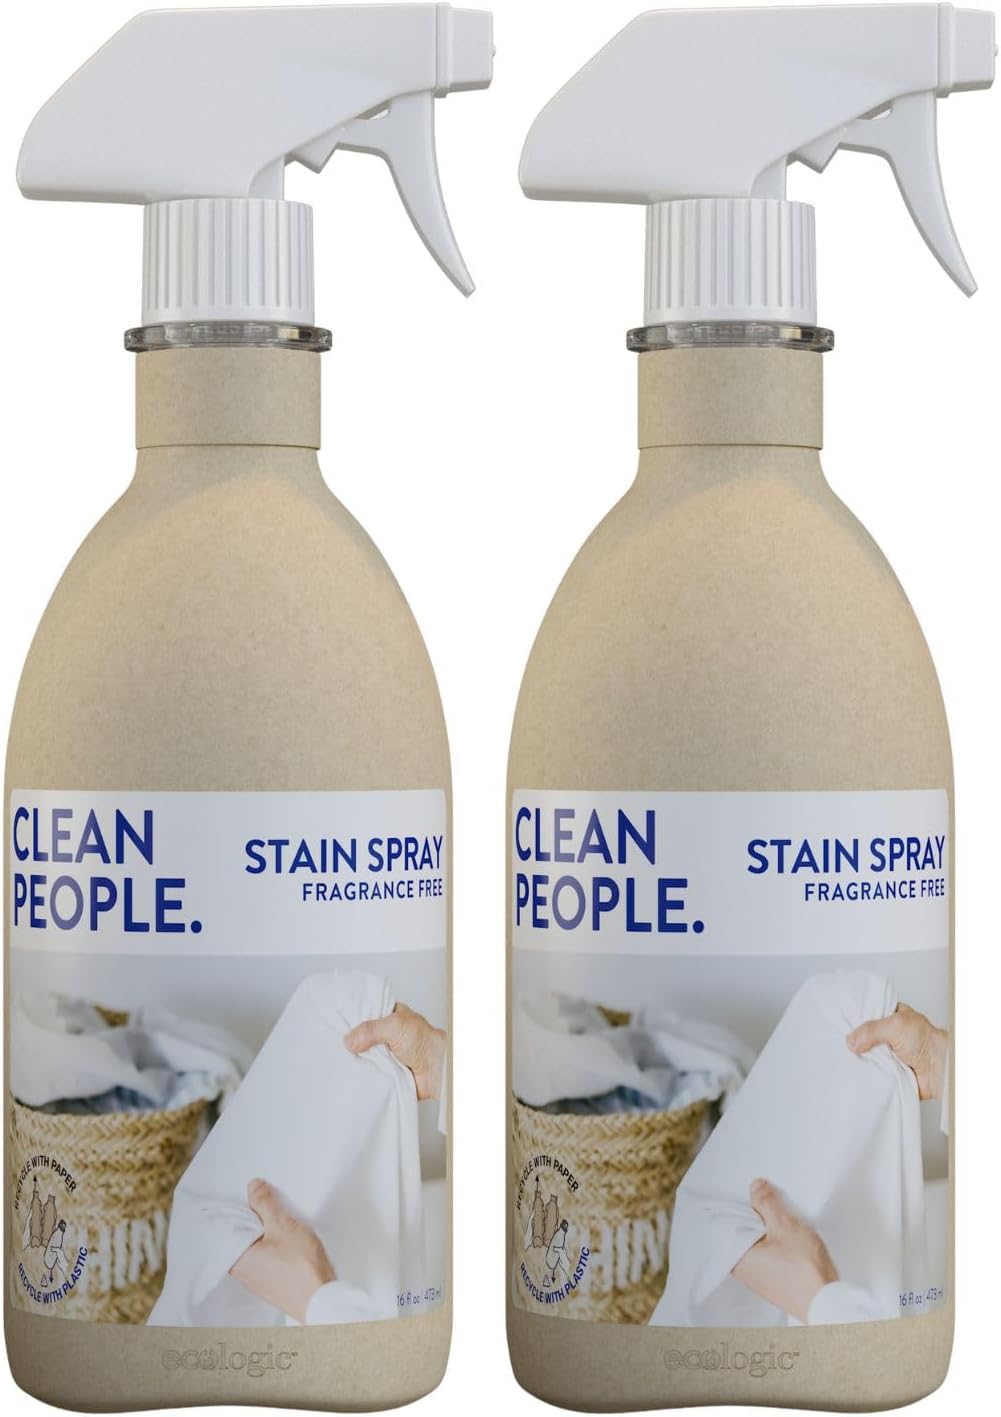 Clean People Stain Remover Spray - Natural Plant & Mineral-Based Ingredients - Non-Toxic Laundry Spot Treatment for Food, Pet & Baby Stains - Boosted with Enzymes - Fabric Safe - 16oz (2 Pack)…